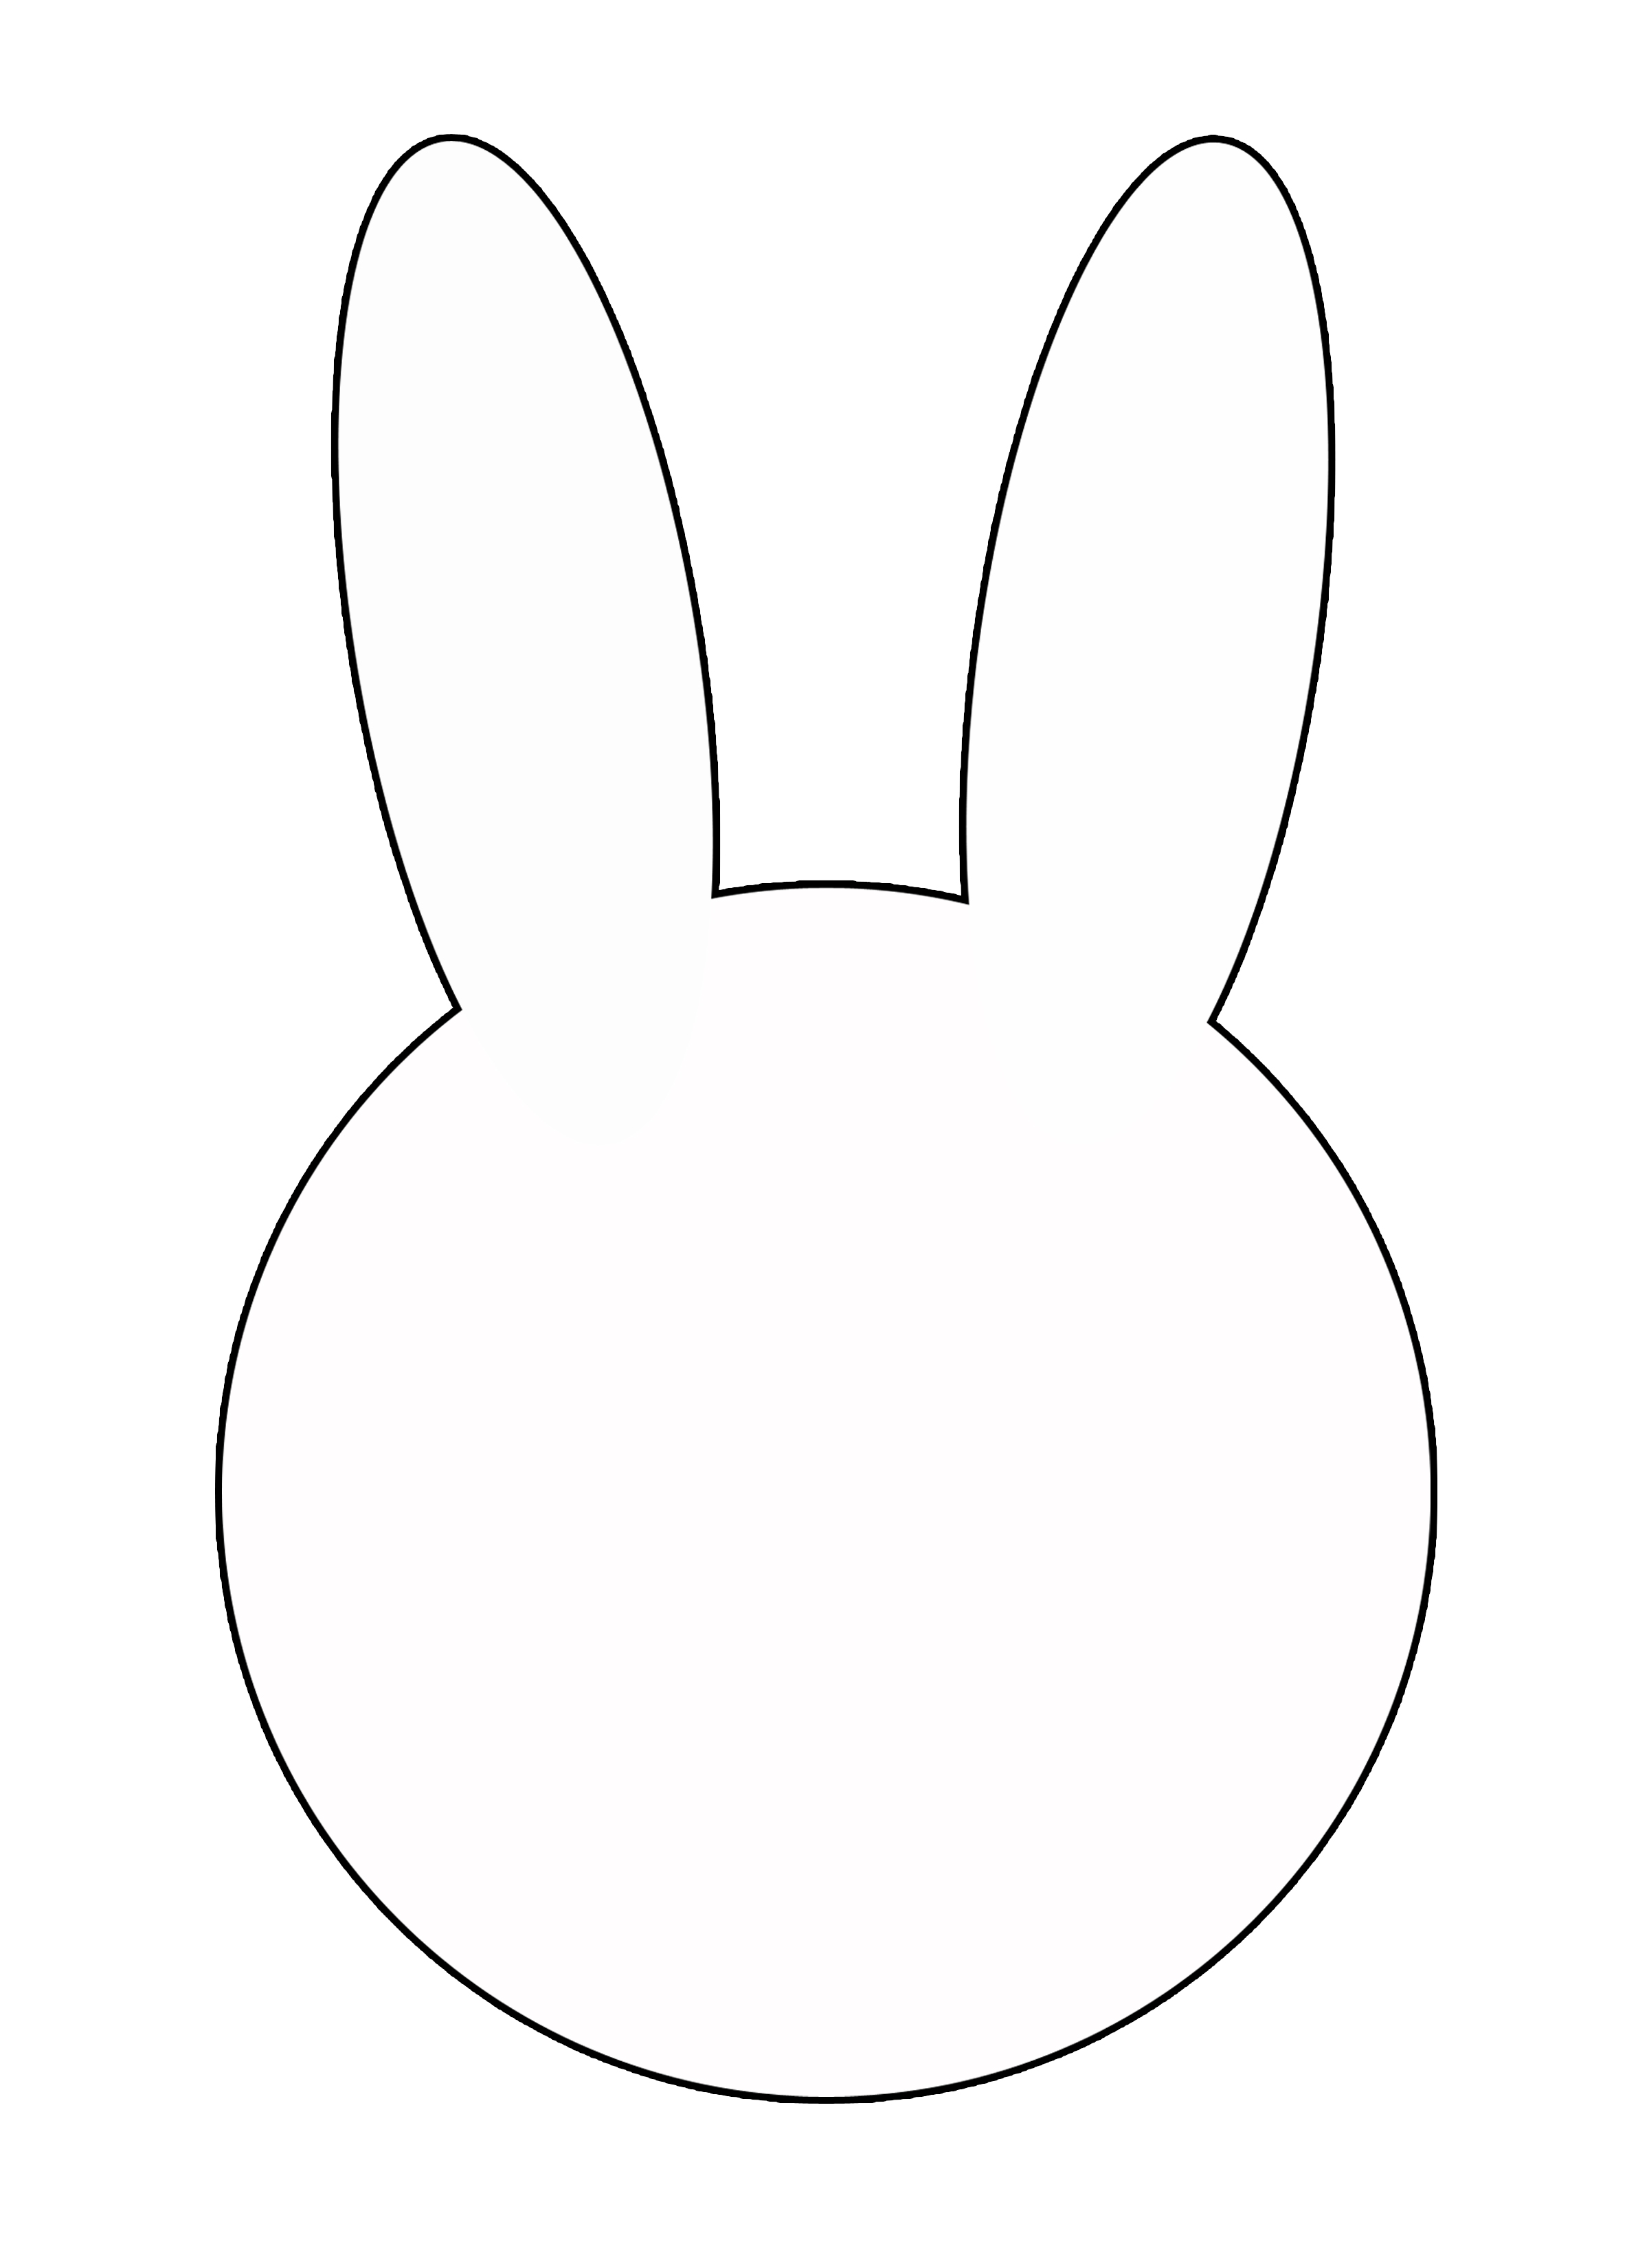 10 Bunny Head Template Free Cliparts That You Can Download To You